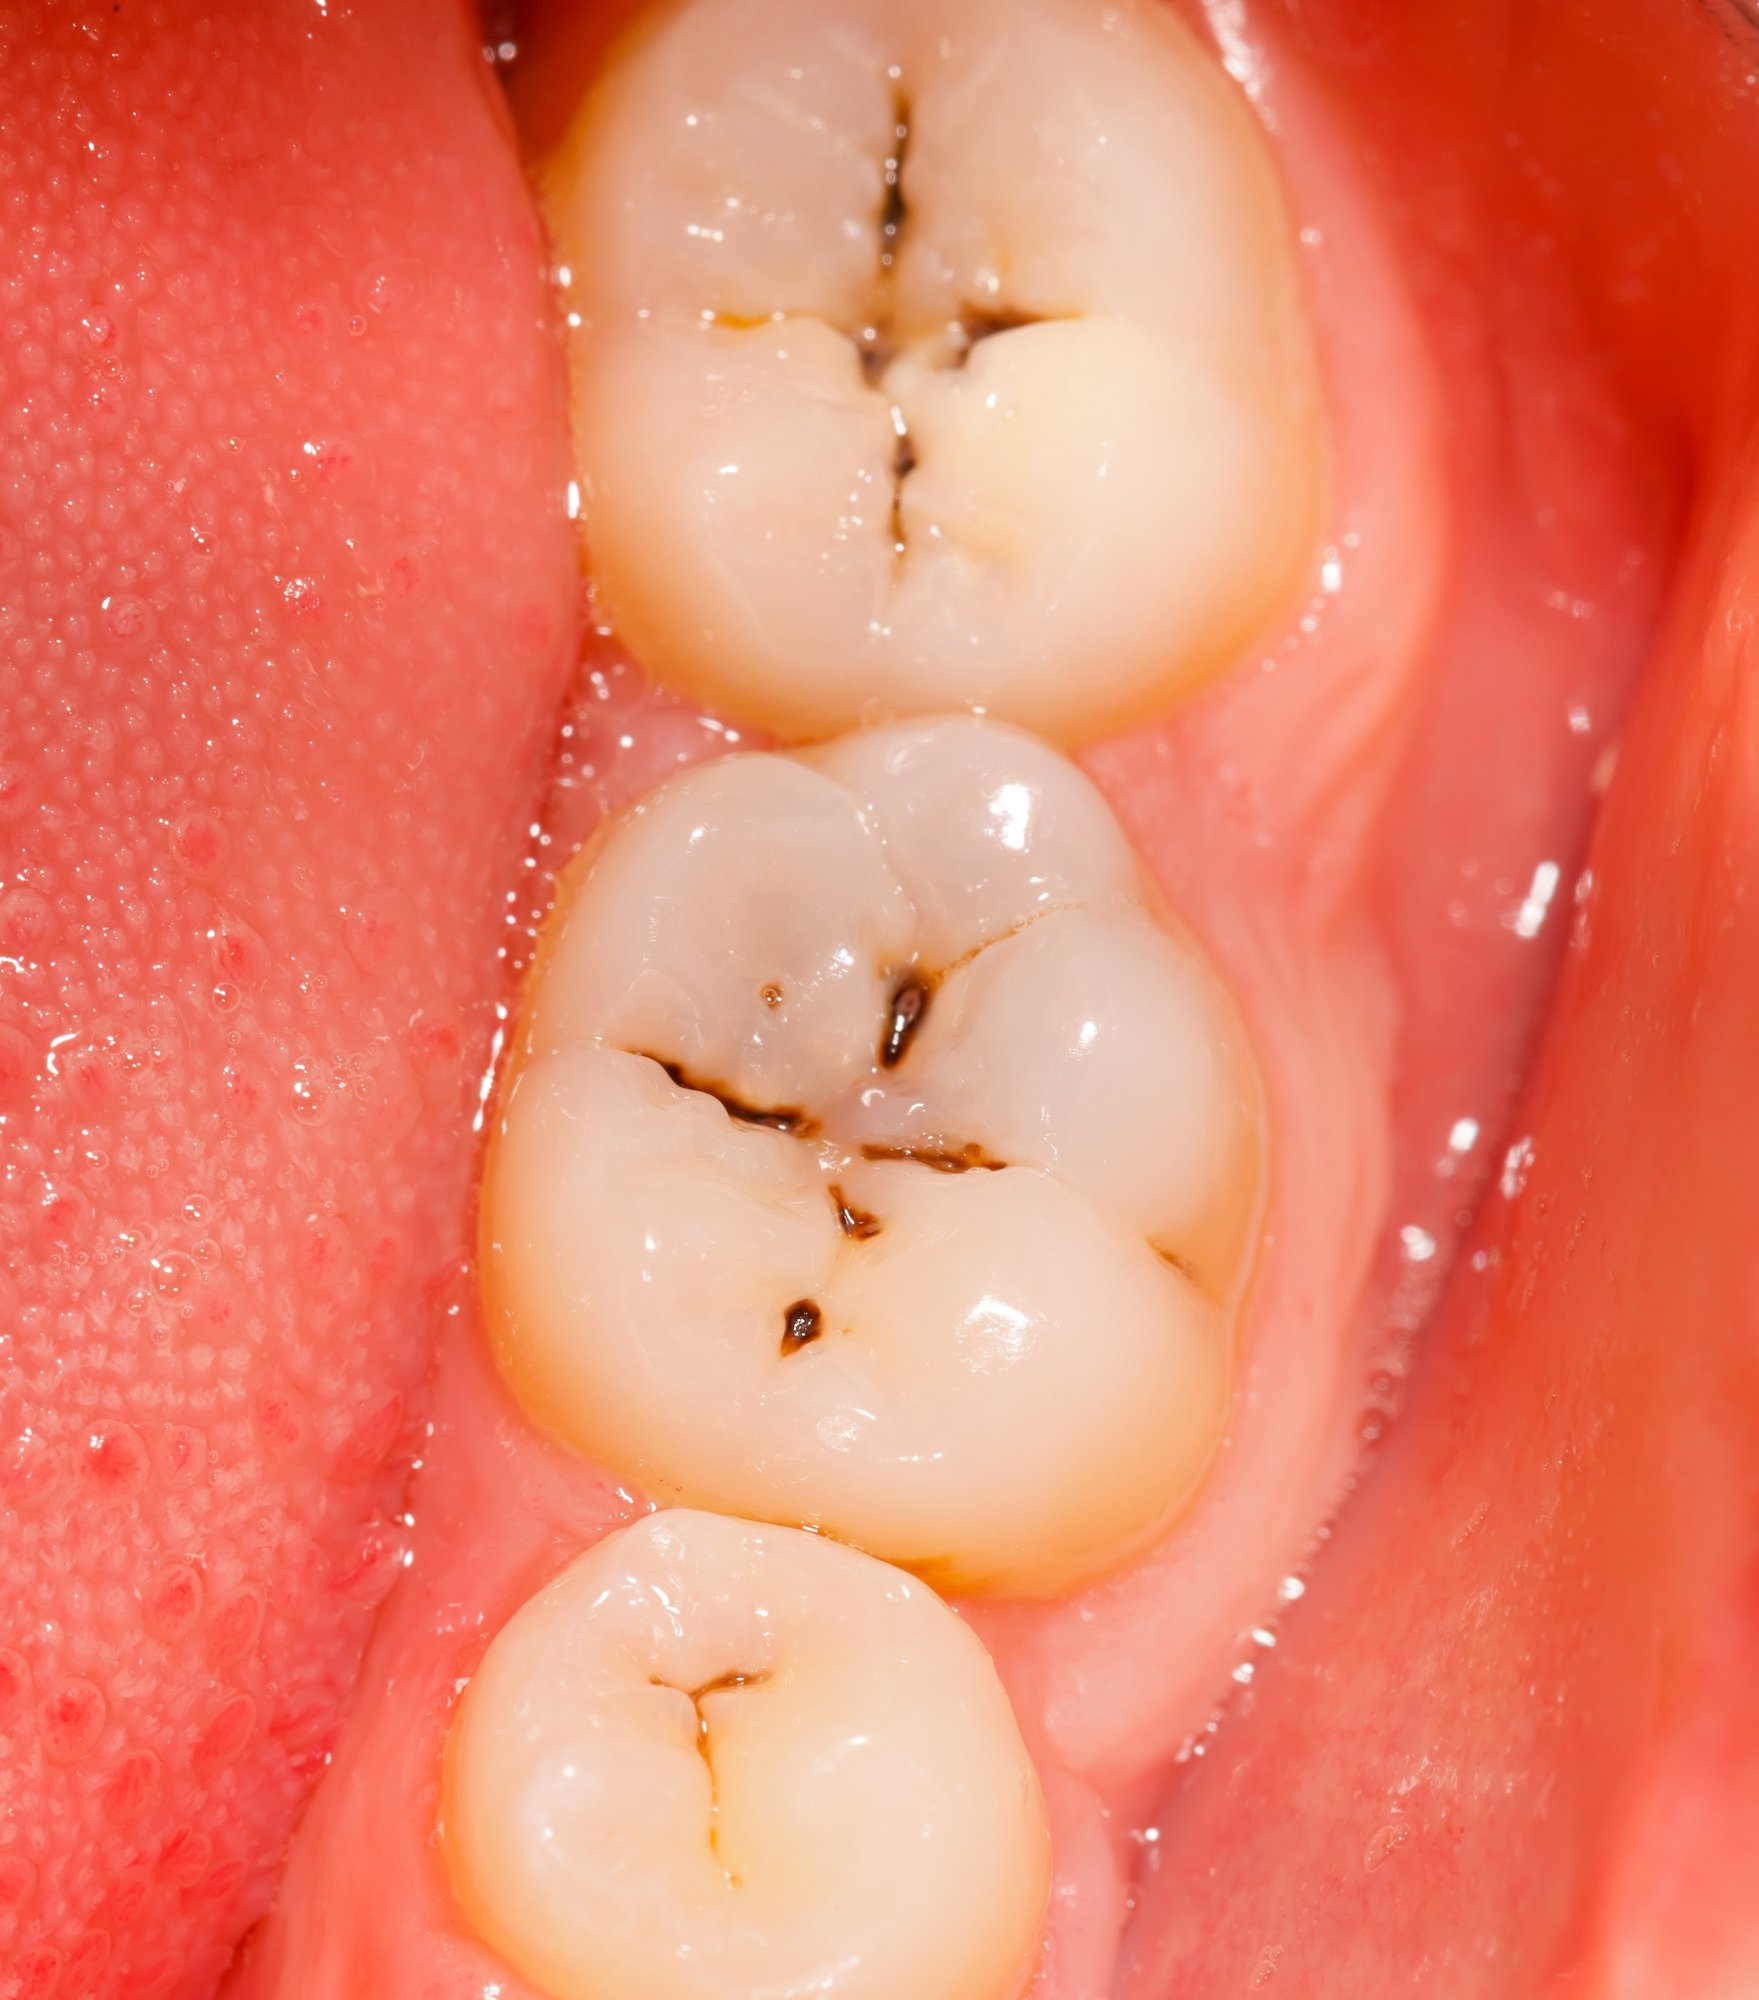 image of small holes and stains in teeth which are cavities symptoms